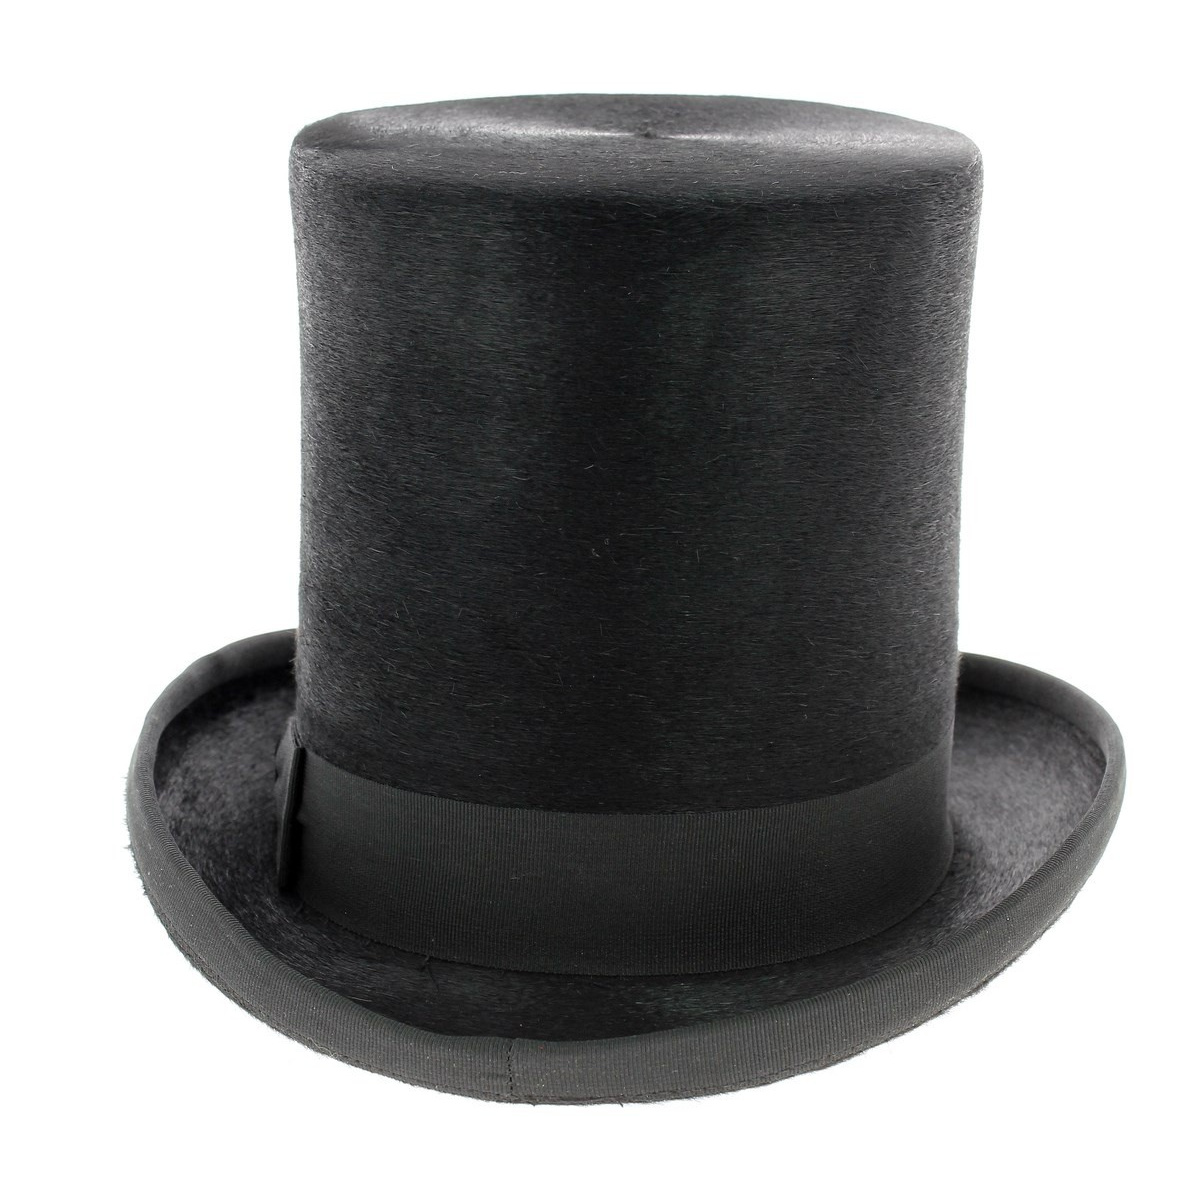 Top Hat black melusine 16 cm - Traclet Reference : 4545 | Chapellerie ...